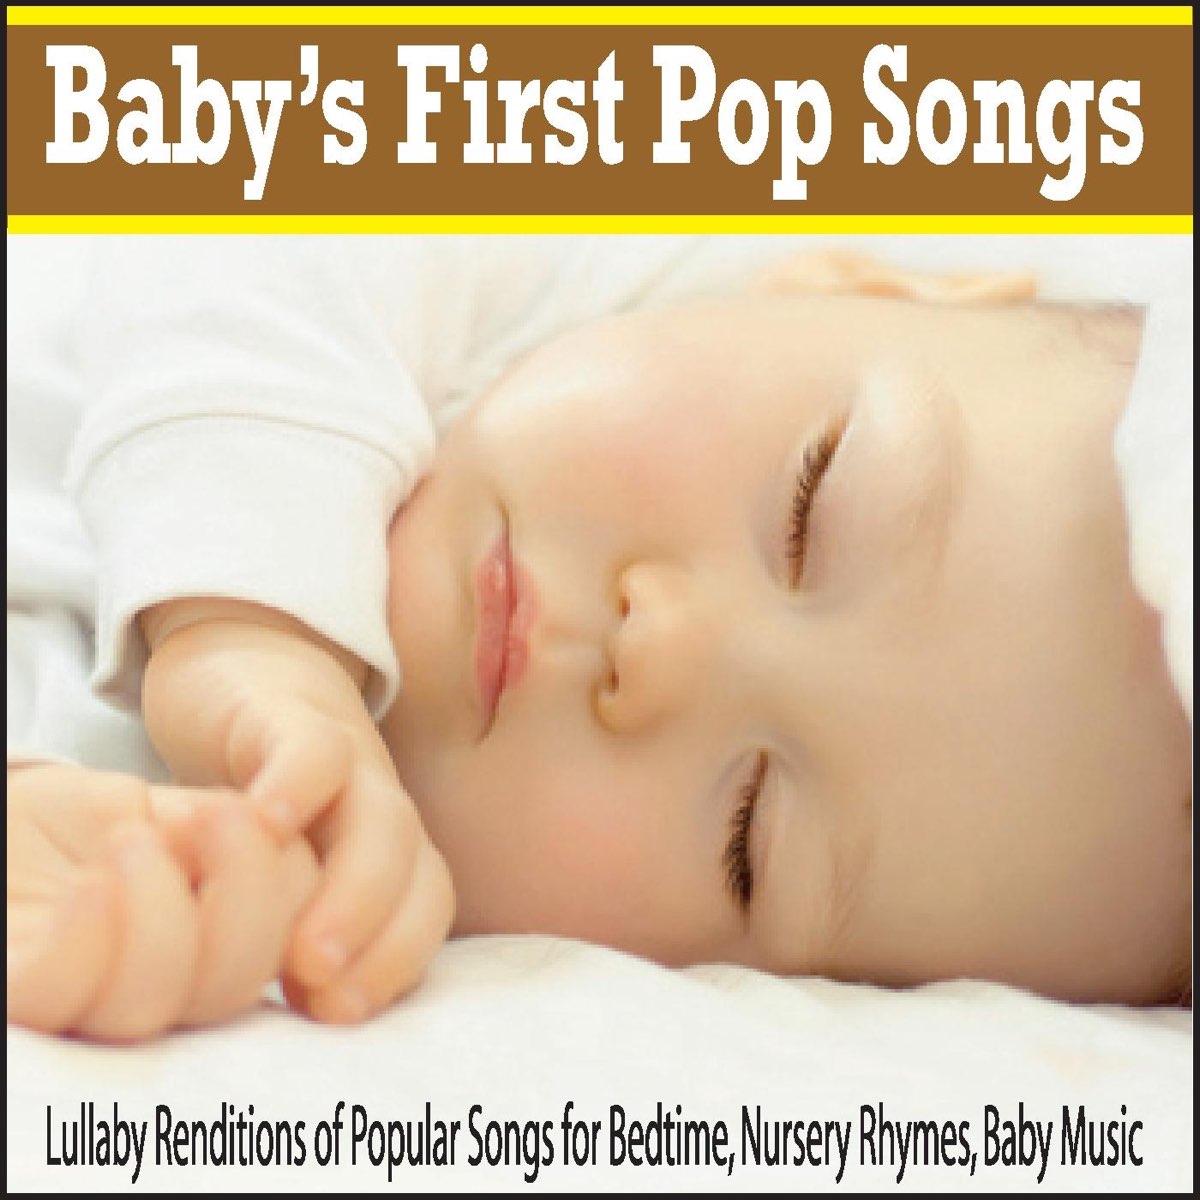 ‎Baby's First Pop Songs: Lullaby Renditions of Popular Songs for Bedtime,  Nursery Rhymes, Baby Music by Robbins Island Music Group on Apple Music